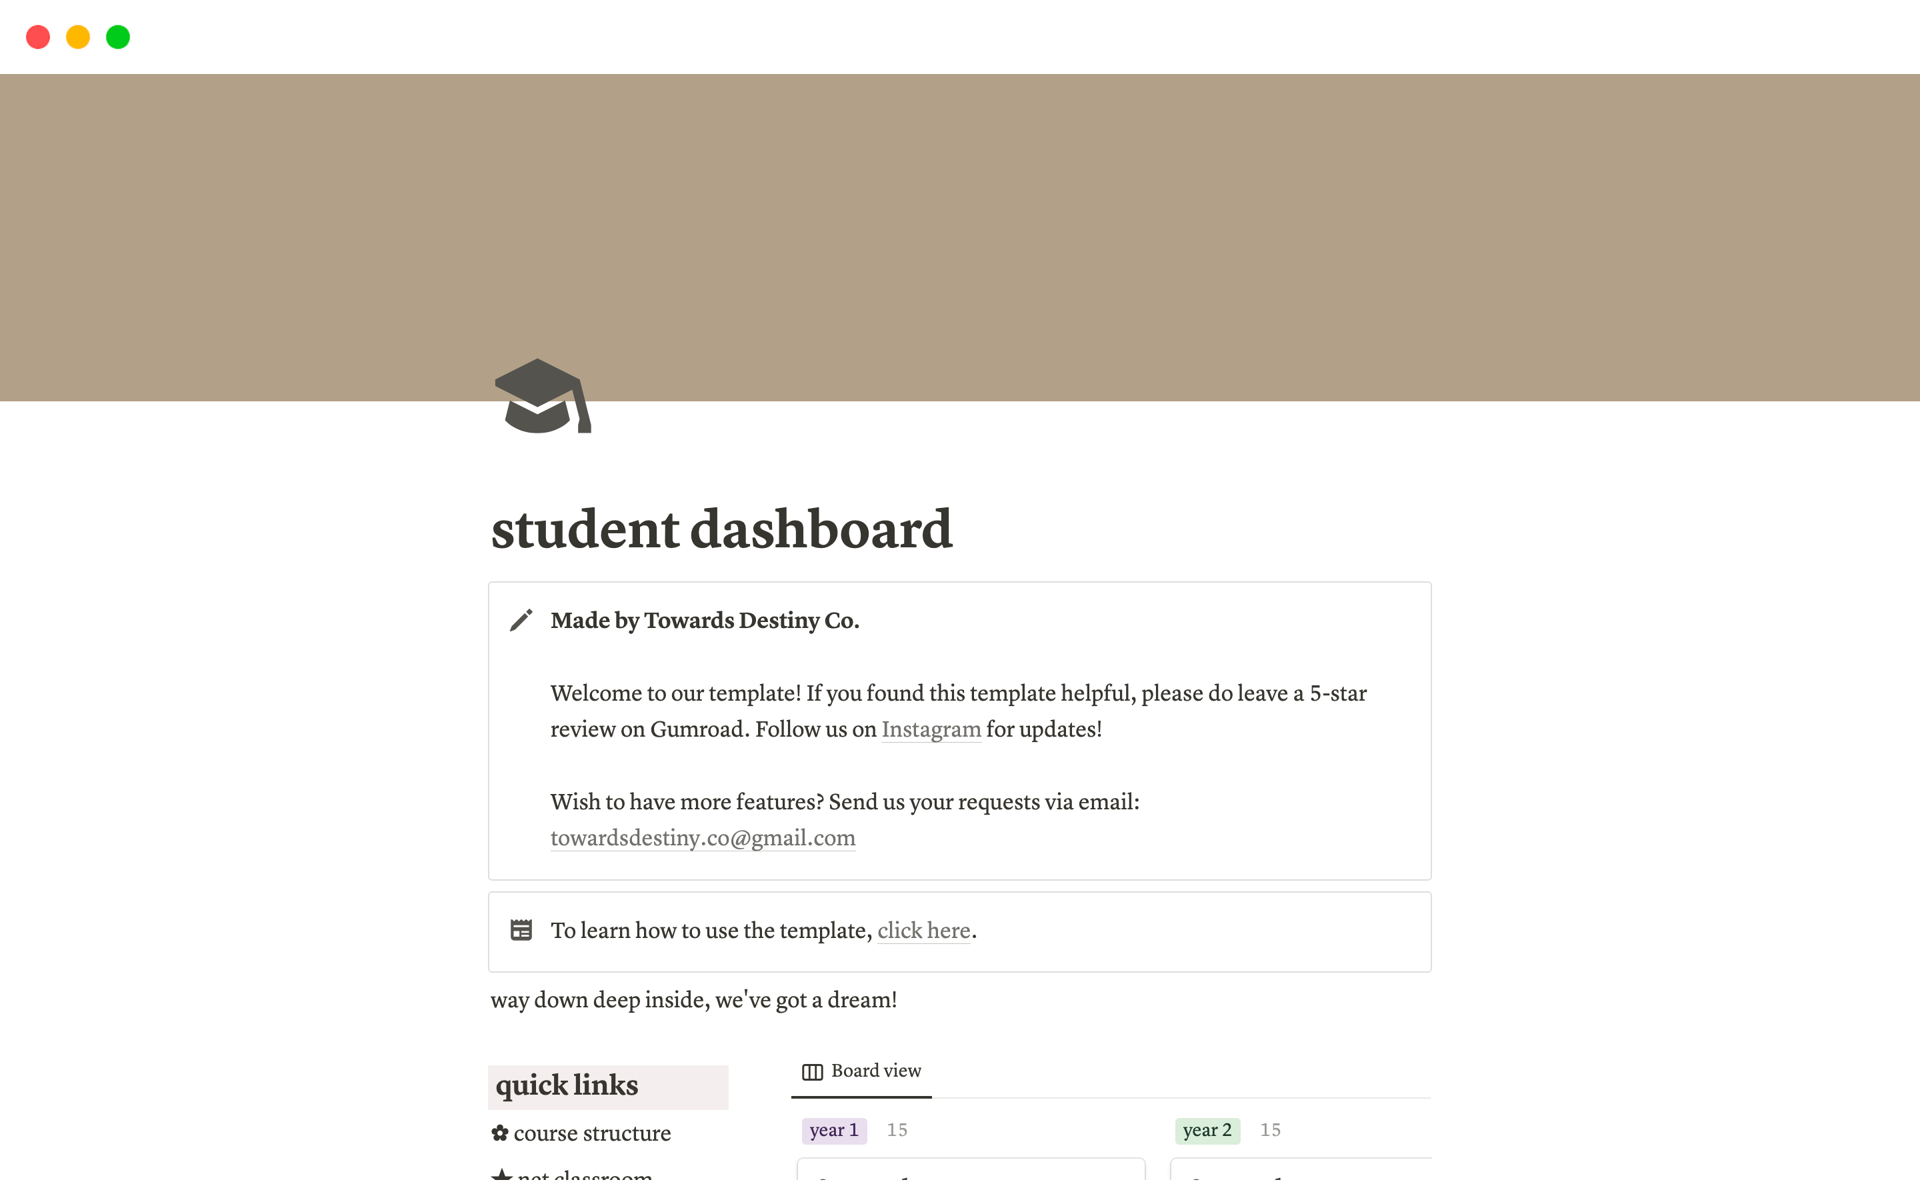 Introducing a pre-built template crafted to help students manage their academic life. Simplify your student life by prioritizing your classes, lecture notes, exams, and assignments, empowering you to excel with ease.